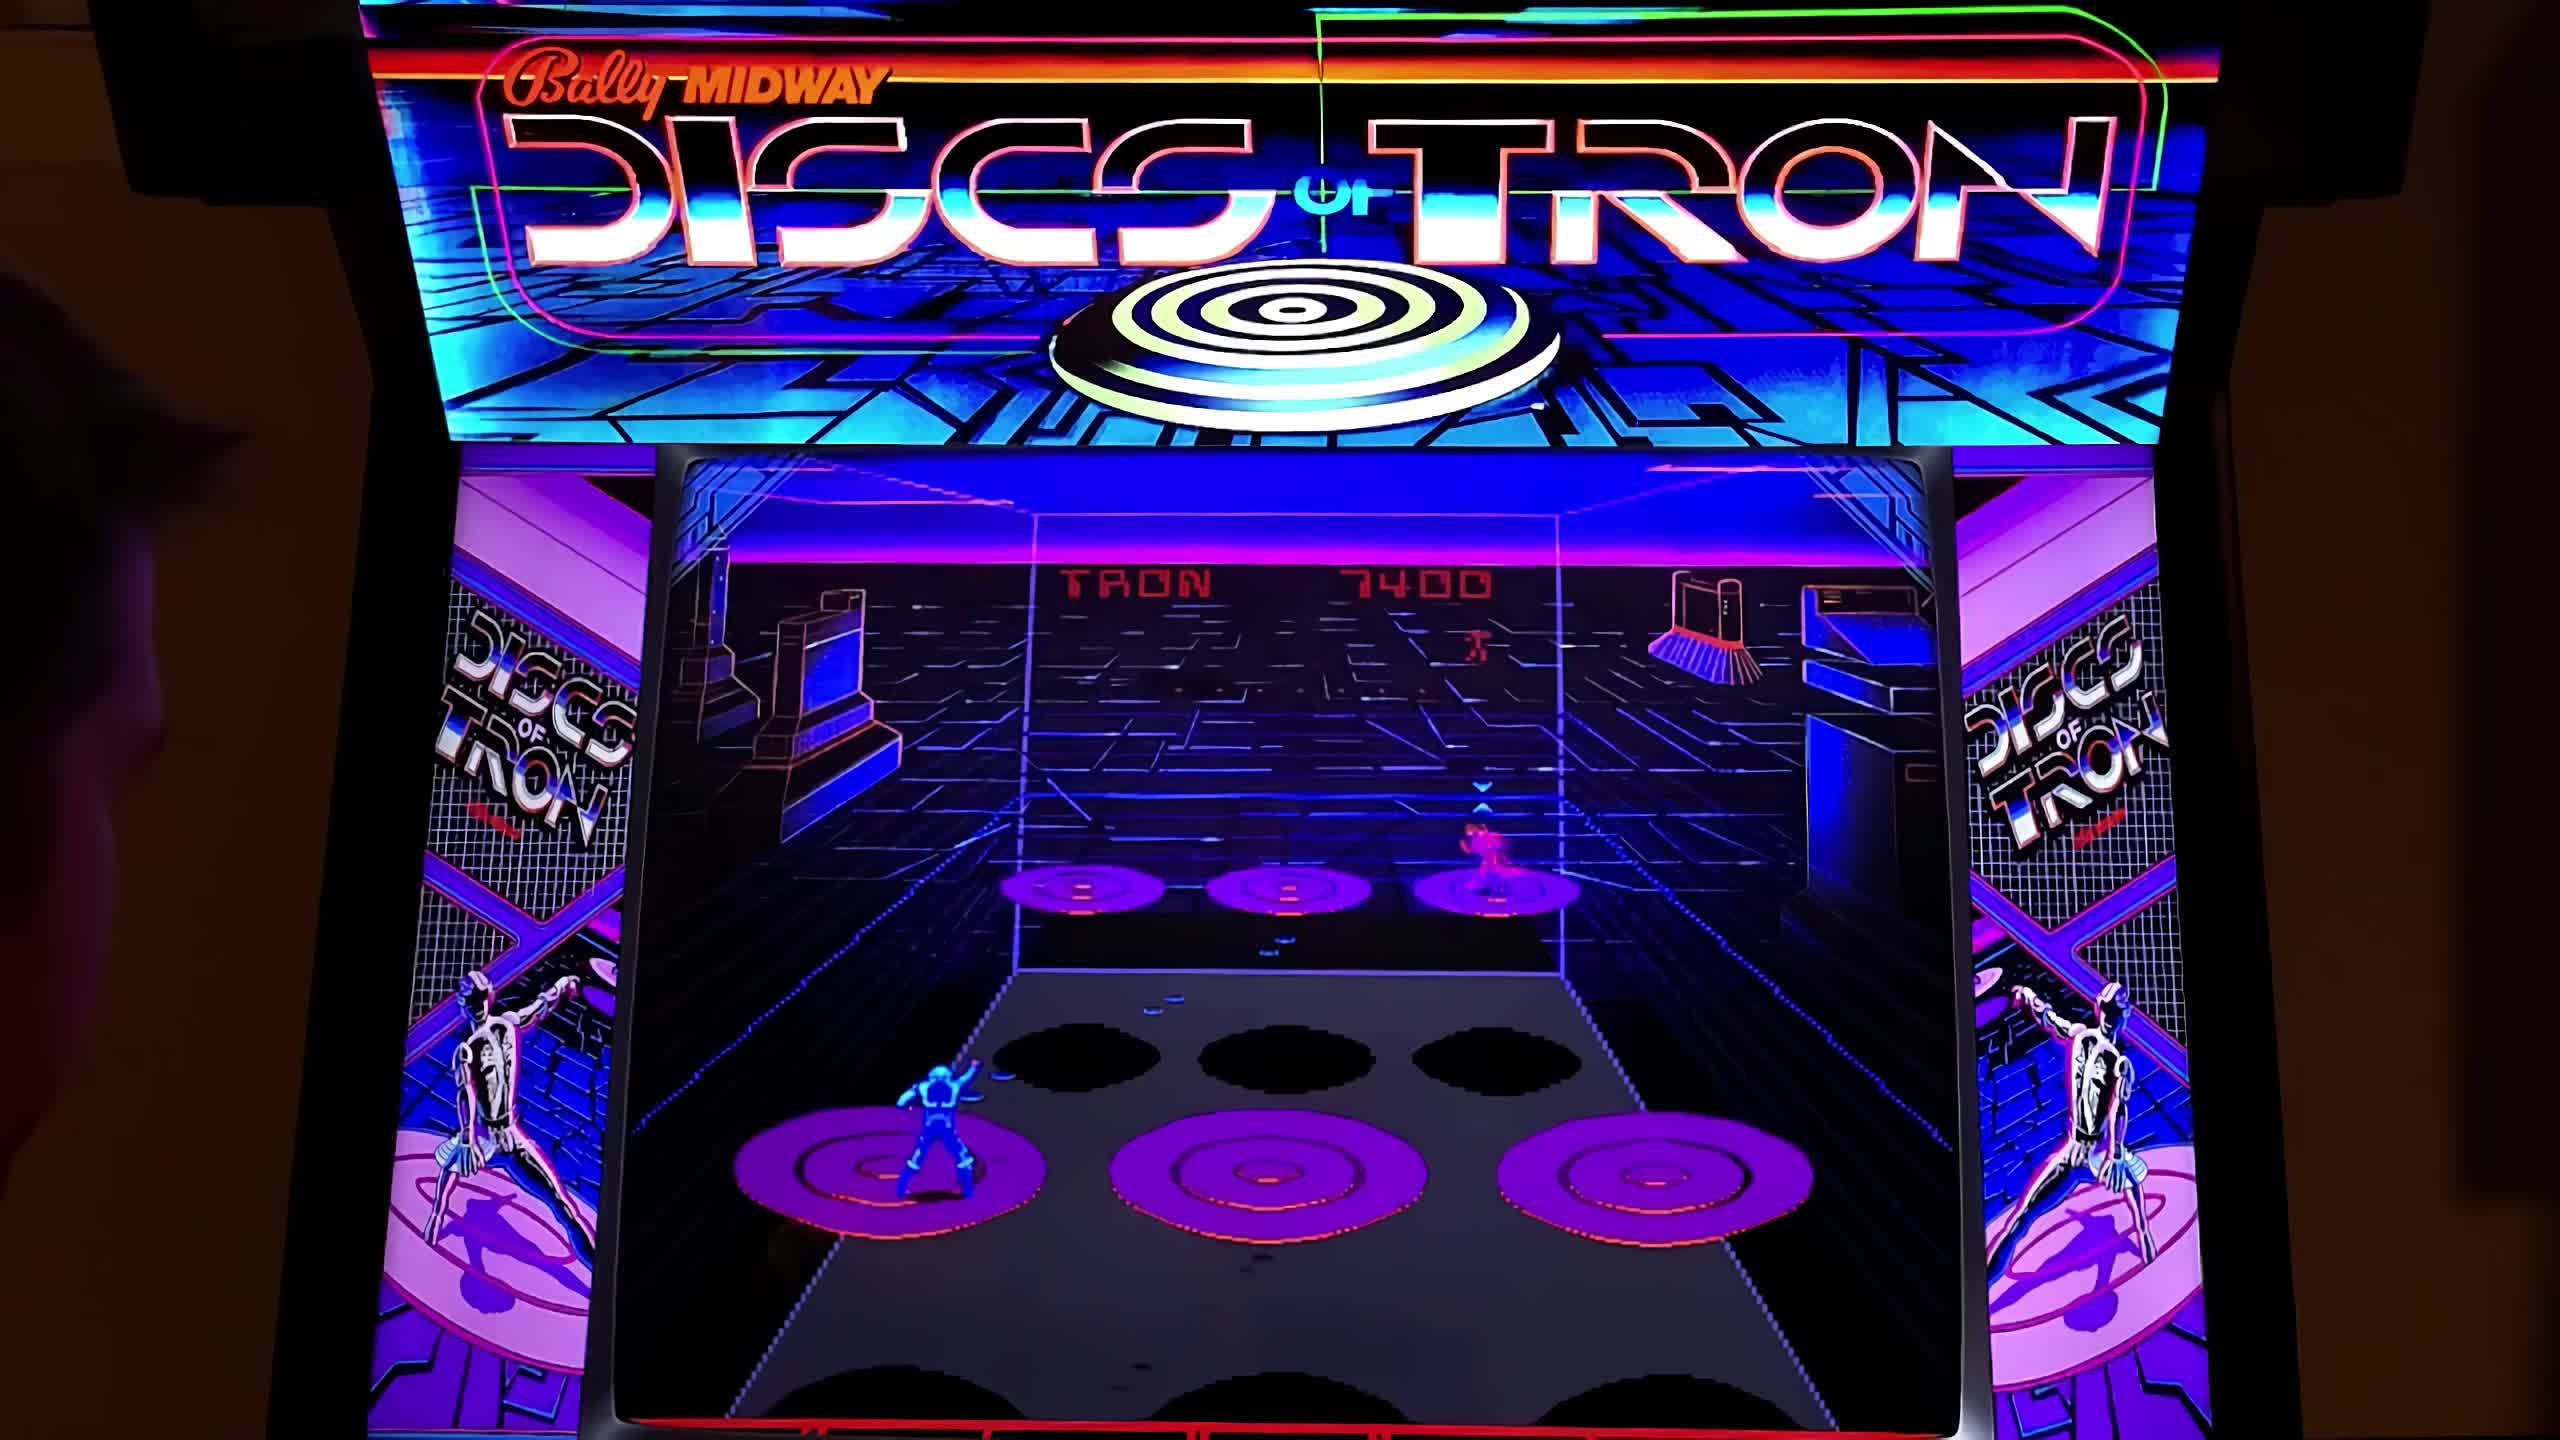 Tron aficionado rescues extremely rare working arcade game his neighbor almost threw out